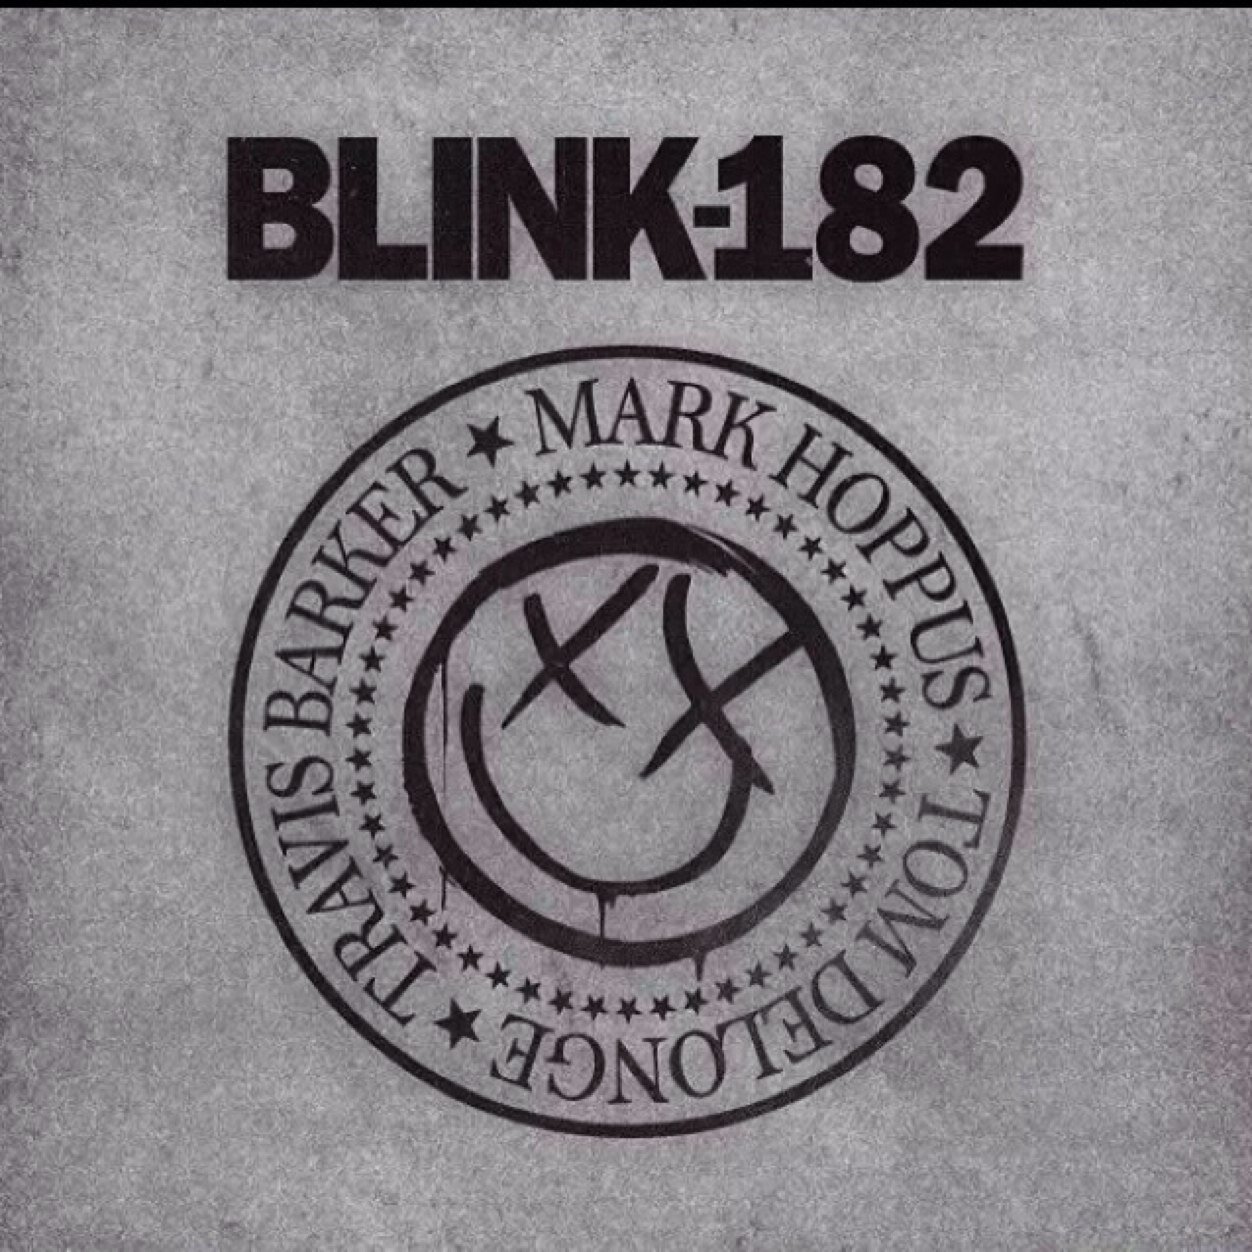 Blink 182 is life